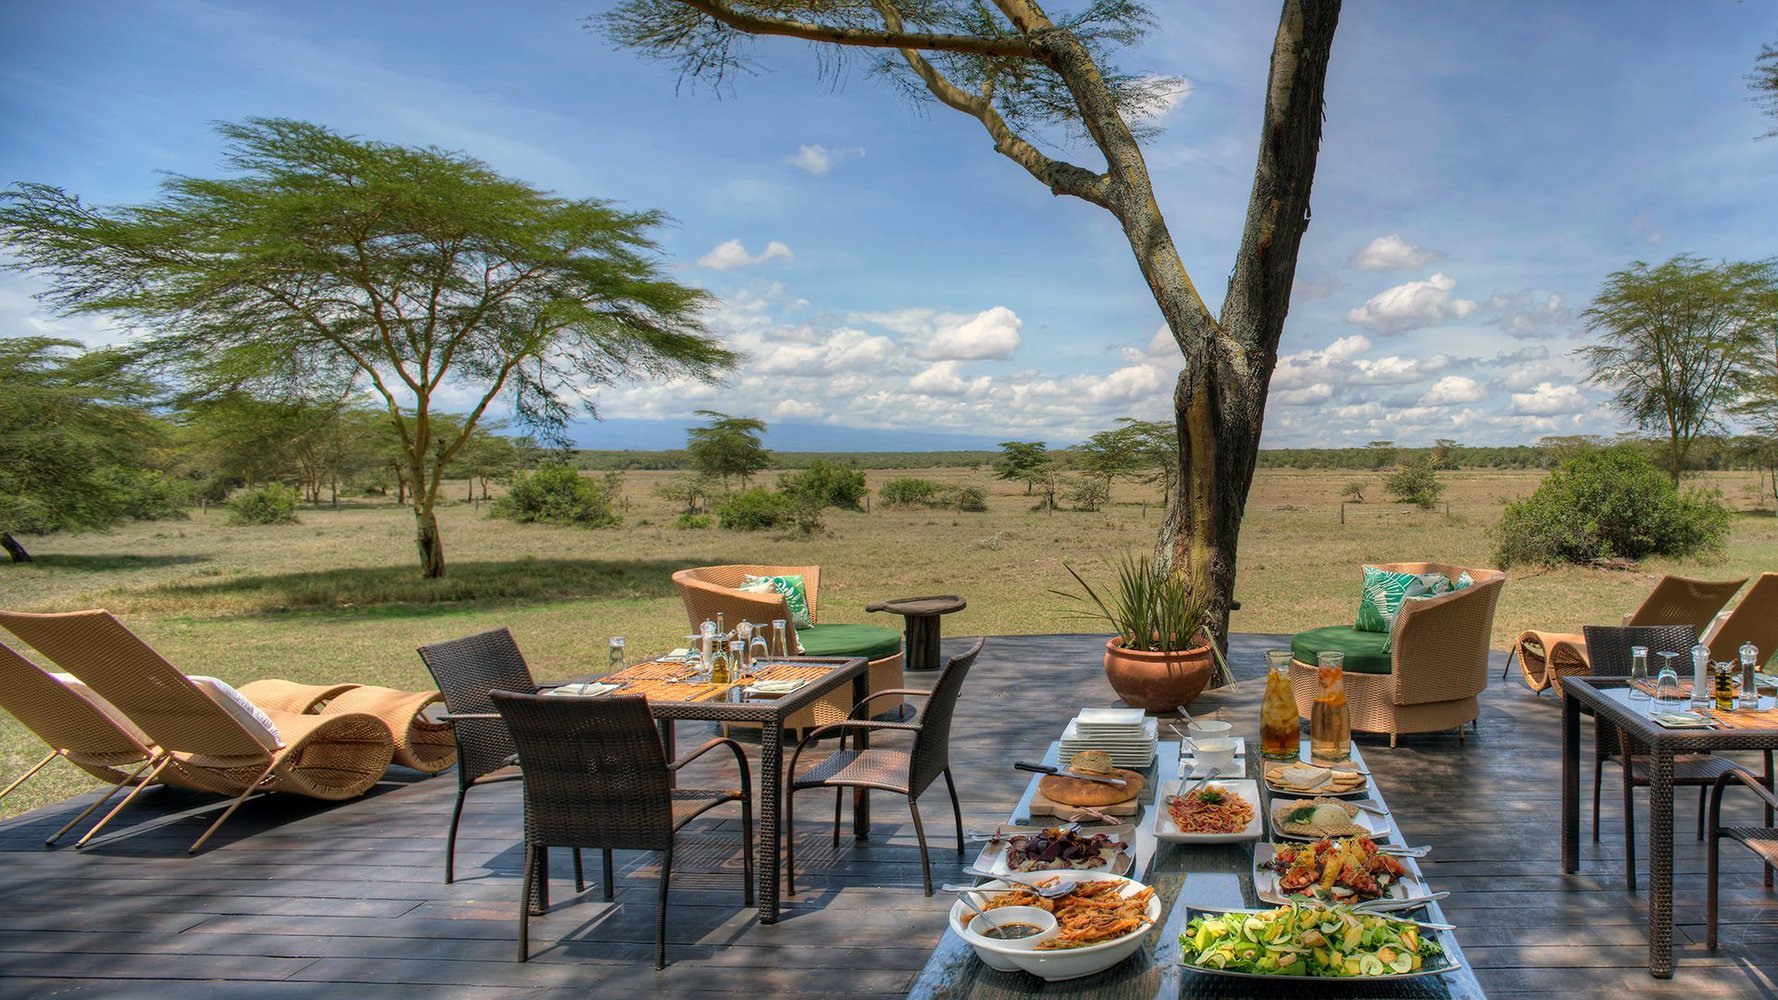 Great Lions Safaris Picnic and meals on the tour